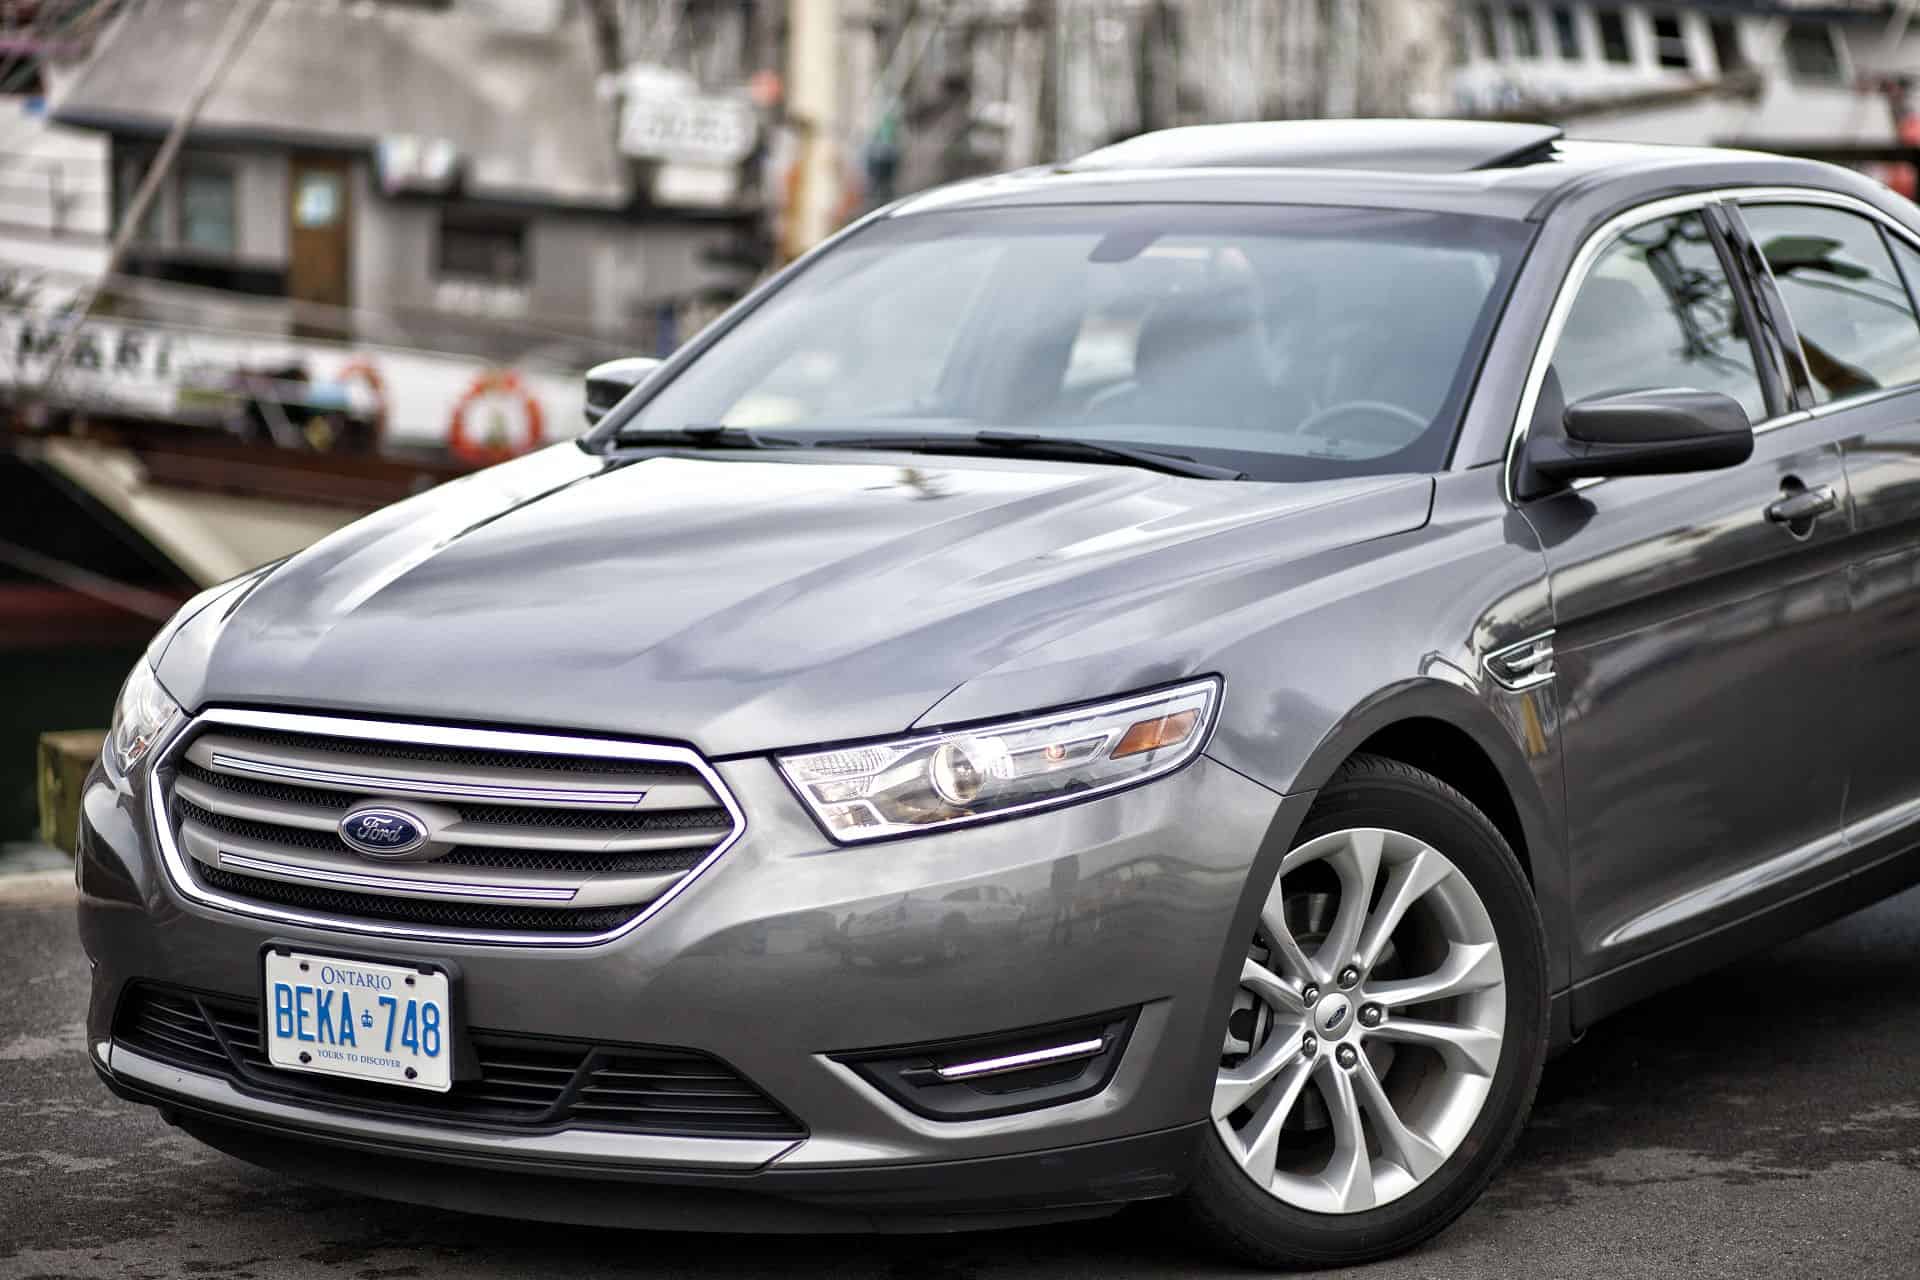 Close up picture of 2013 Ford Taurus